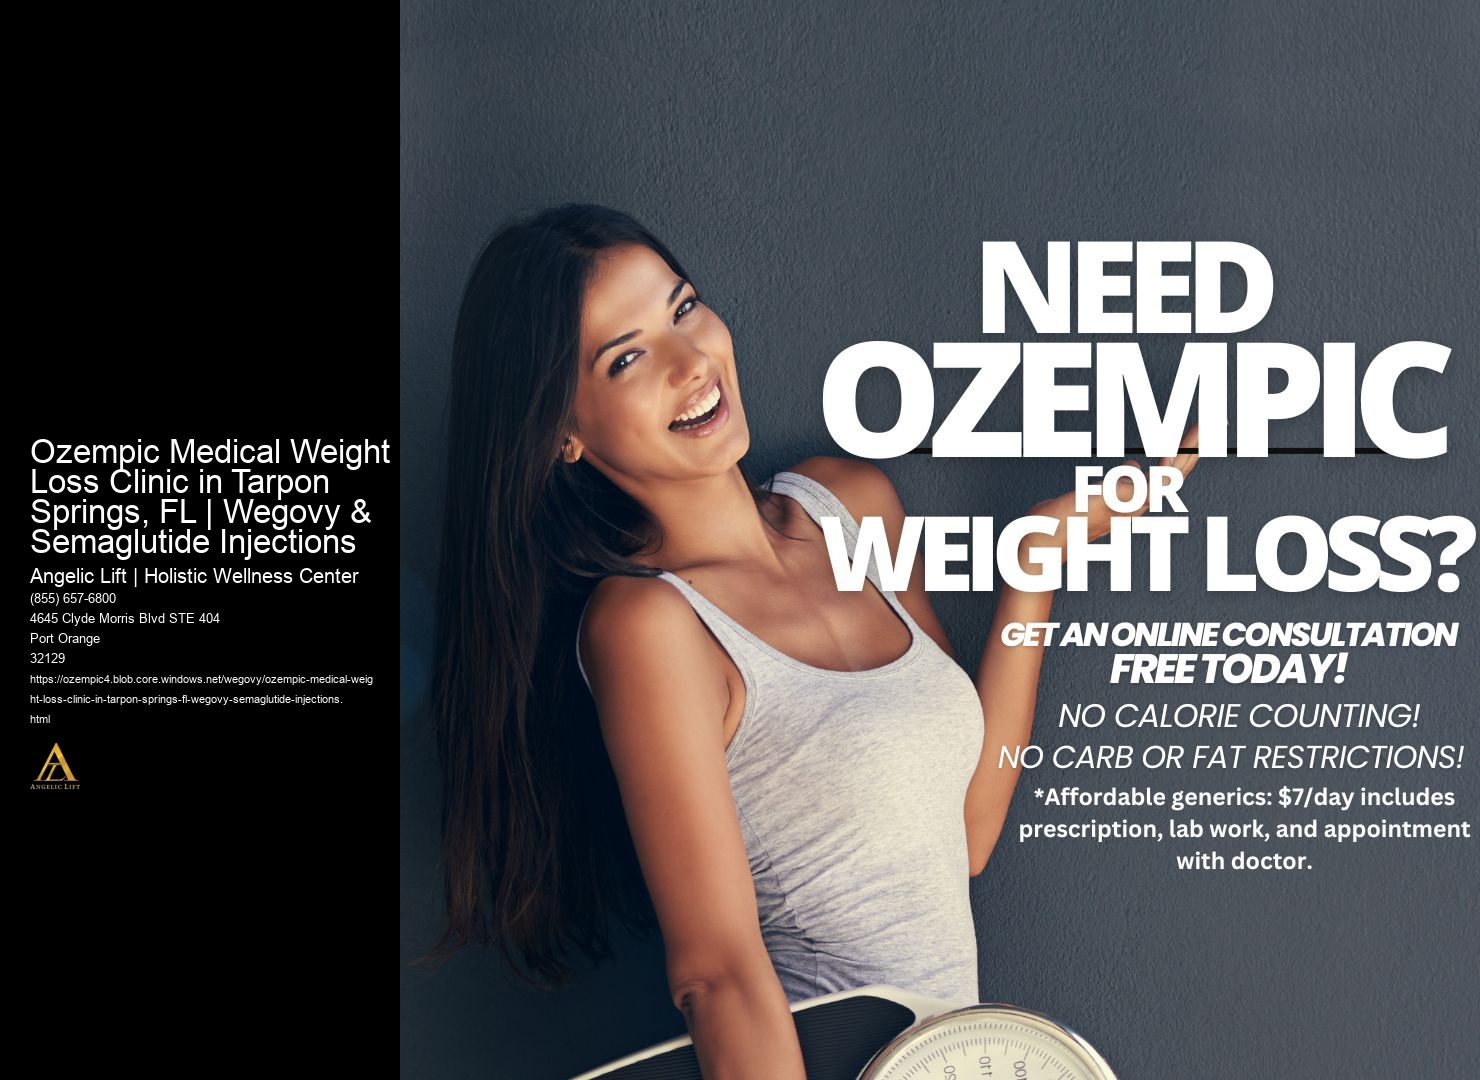 Ozempic Medical Weight Loss Clinic in Tarpon Springs, FL | Wegovy & Semaglutide Injections